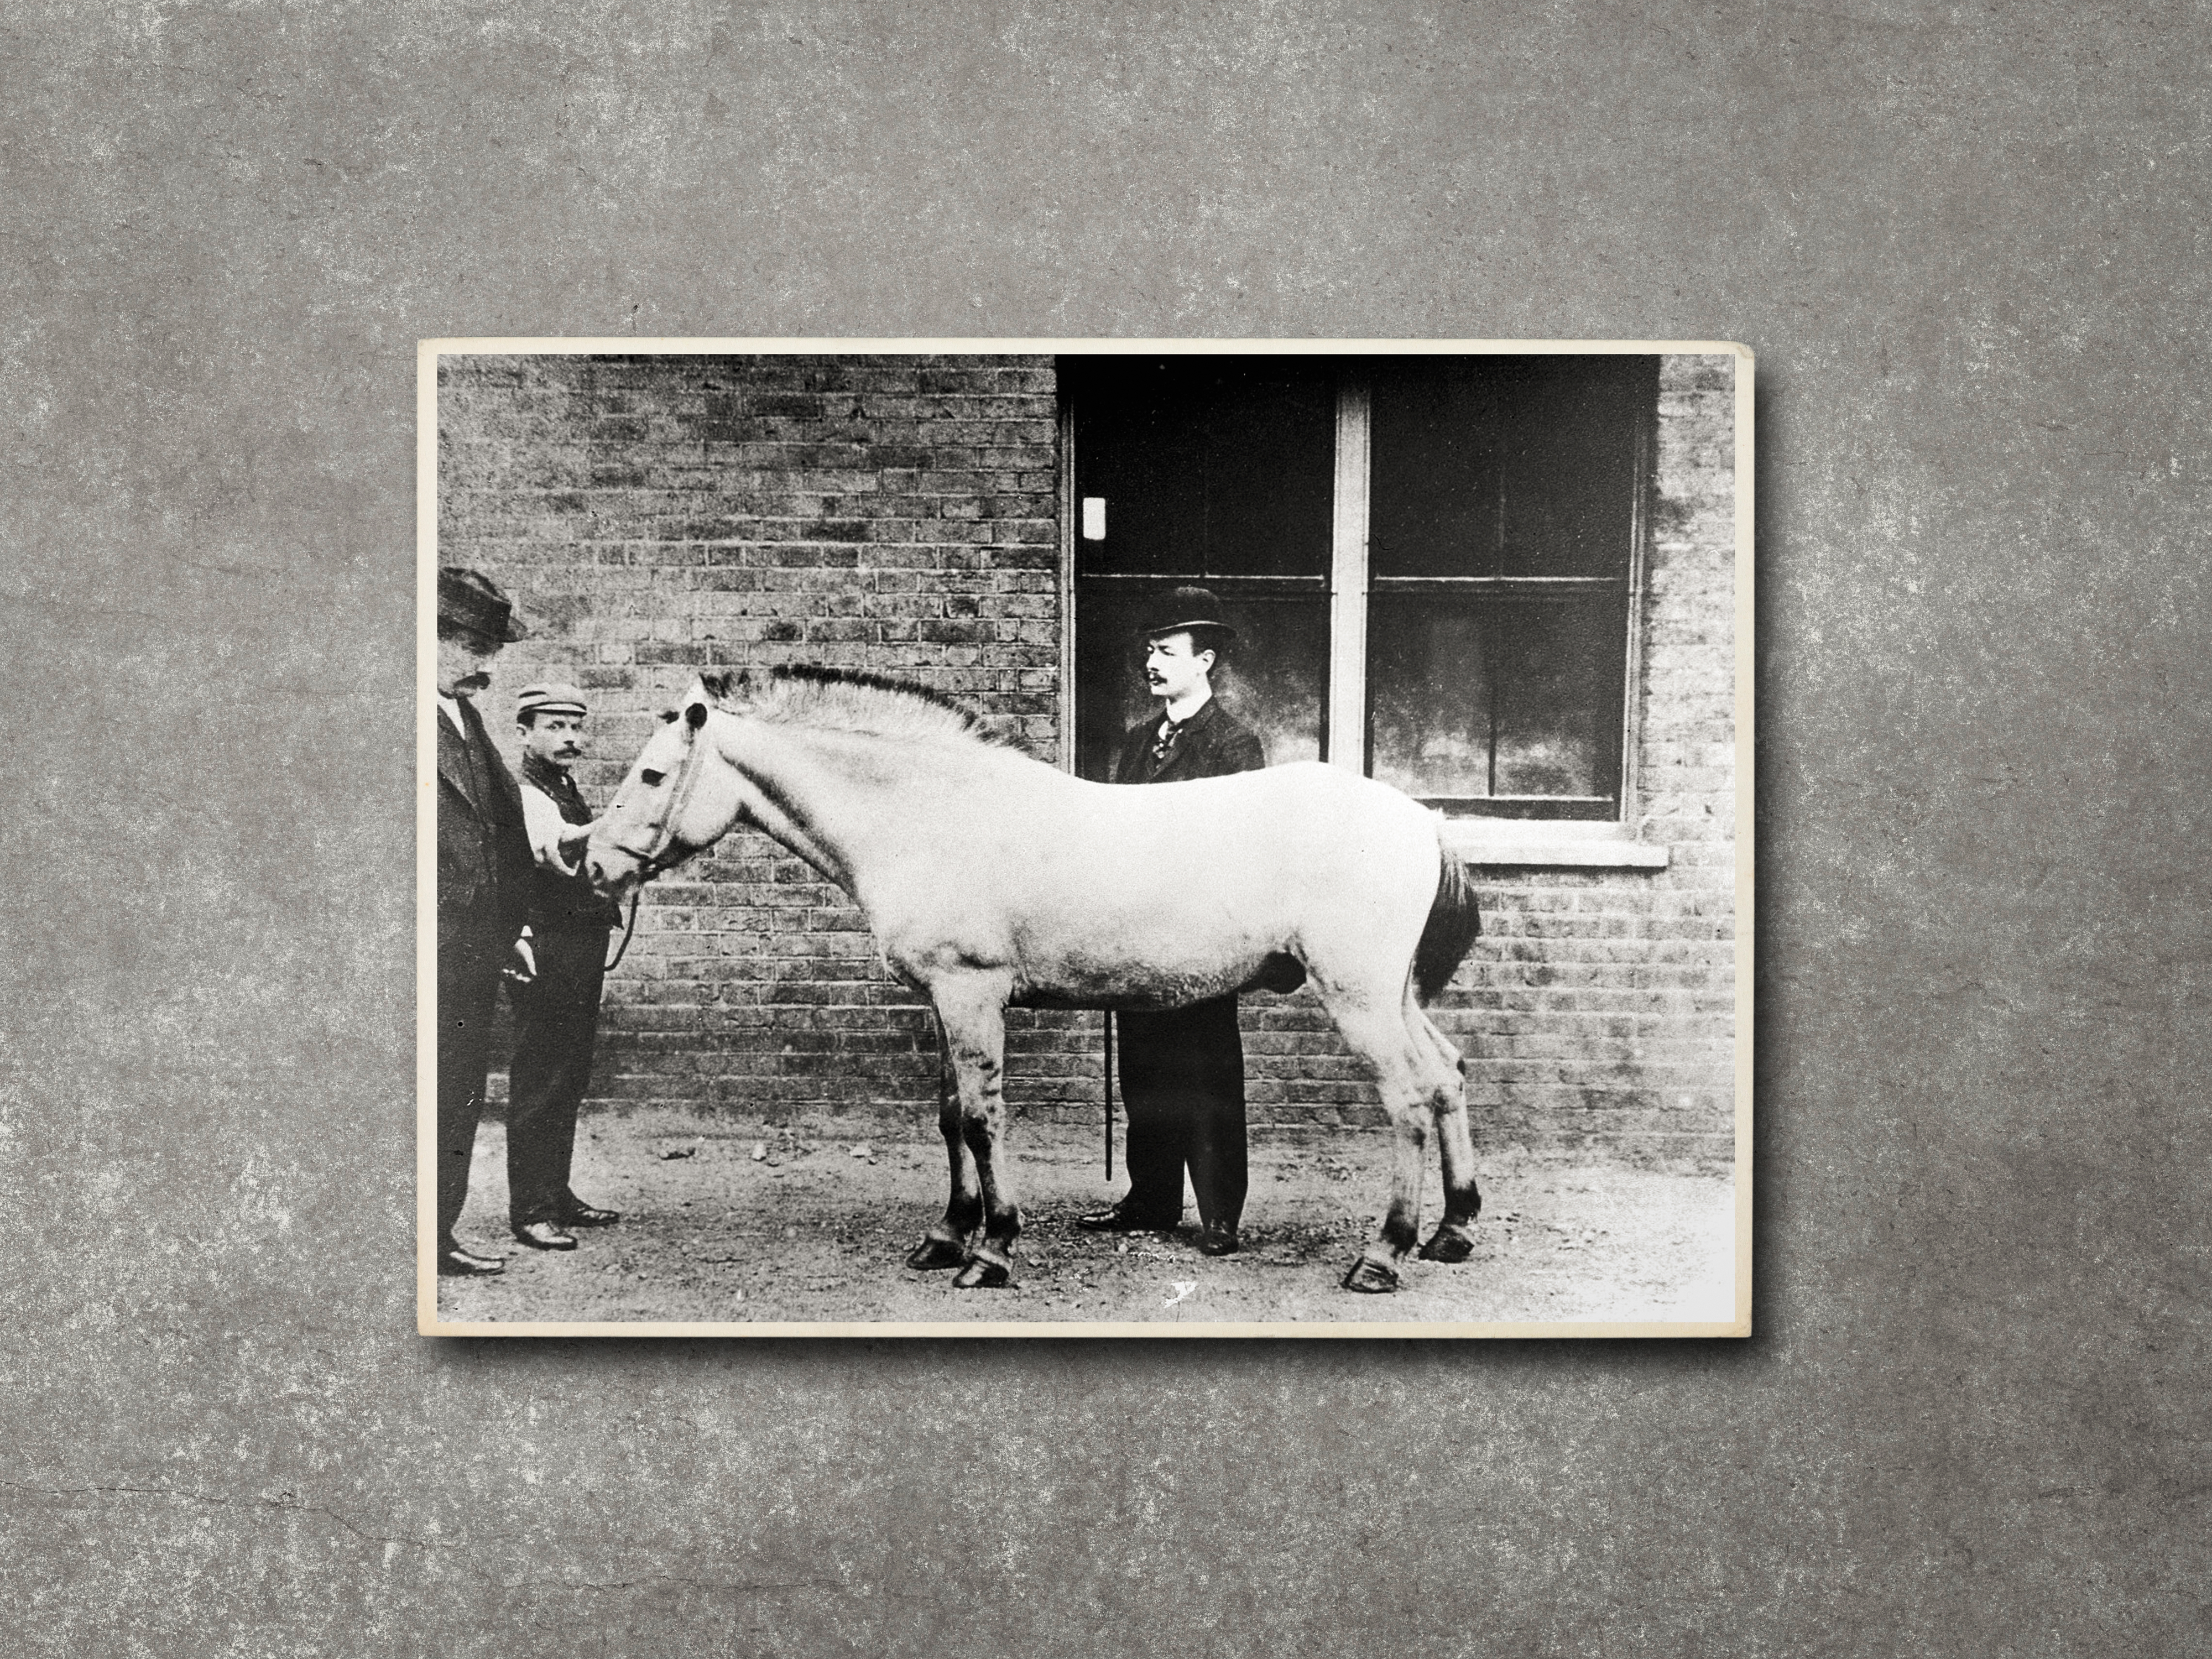 First English pony inoculated for diphtheria antitoxin, 1894